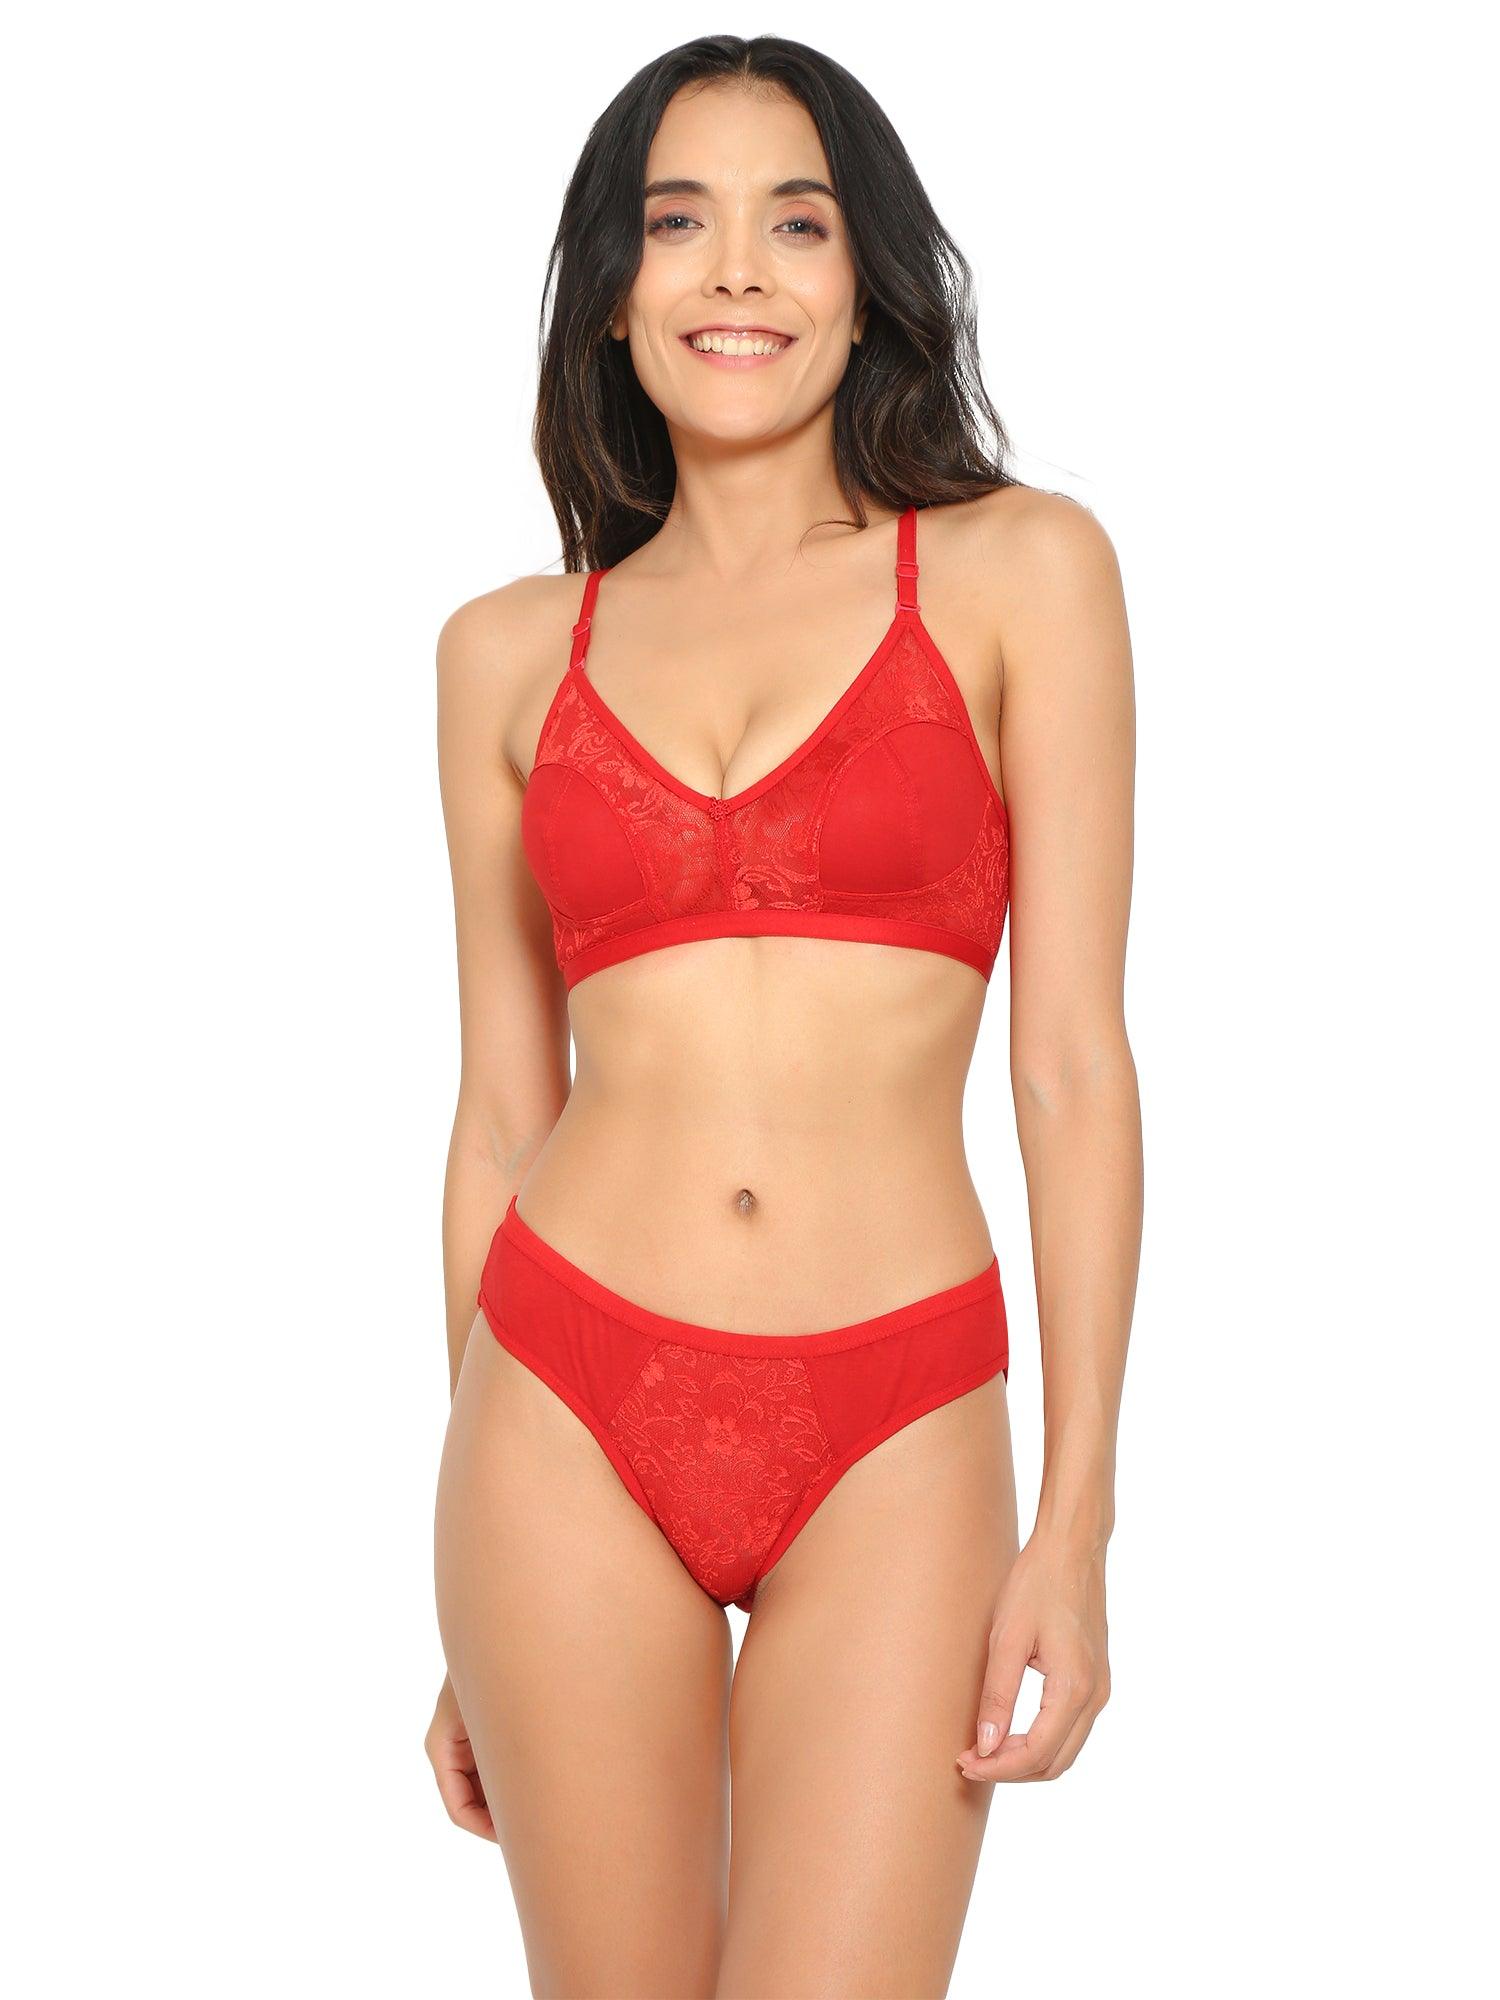 Bridal and Honeymoon Bra and Panty Set - Red